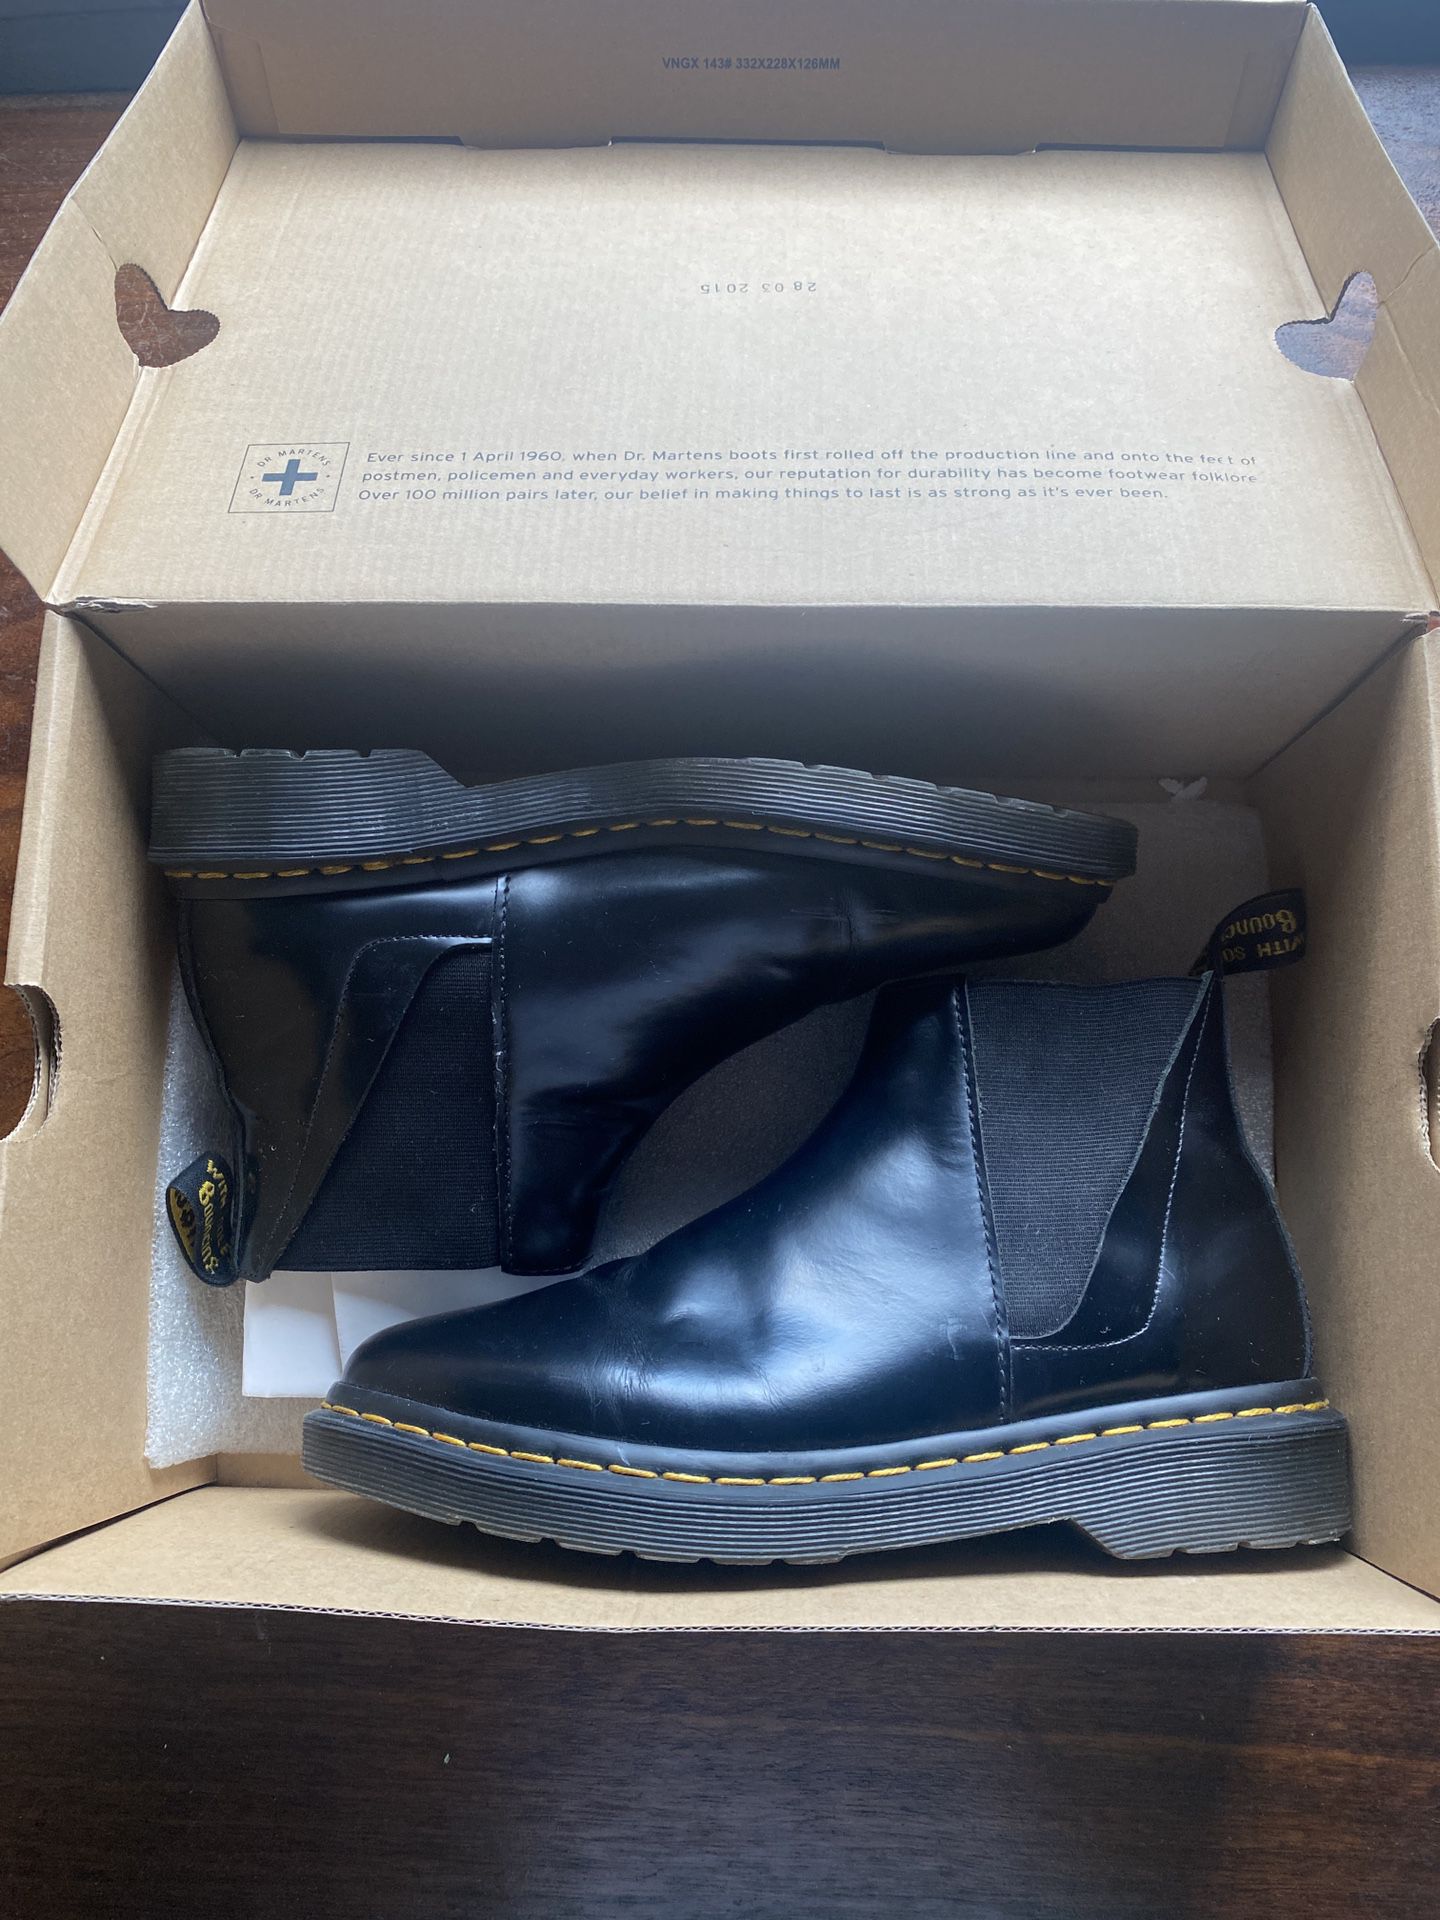 Dr. Martens Pointed Leather Chelsea Boots - Iconic Style with Original Box